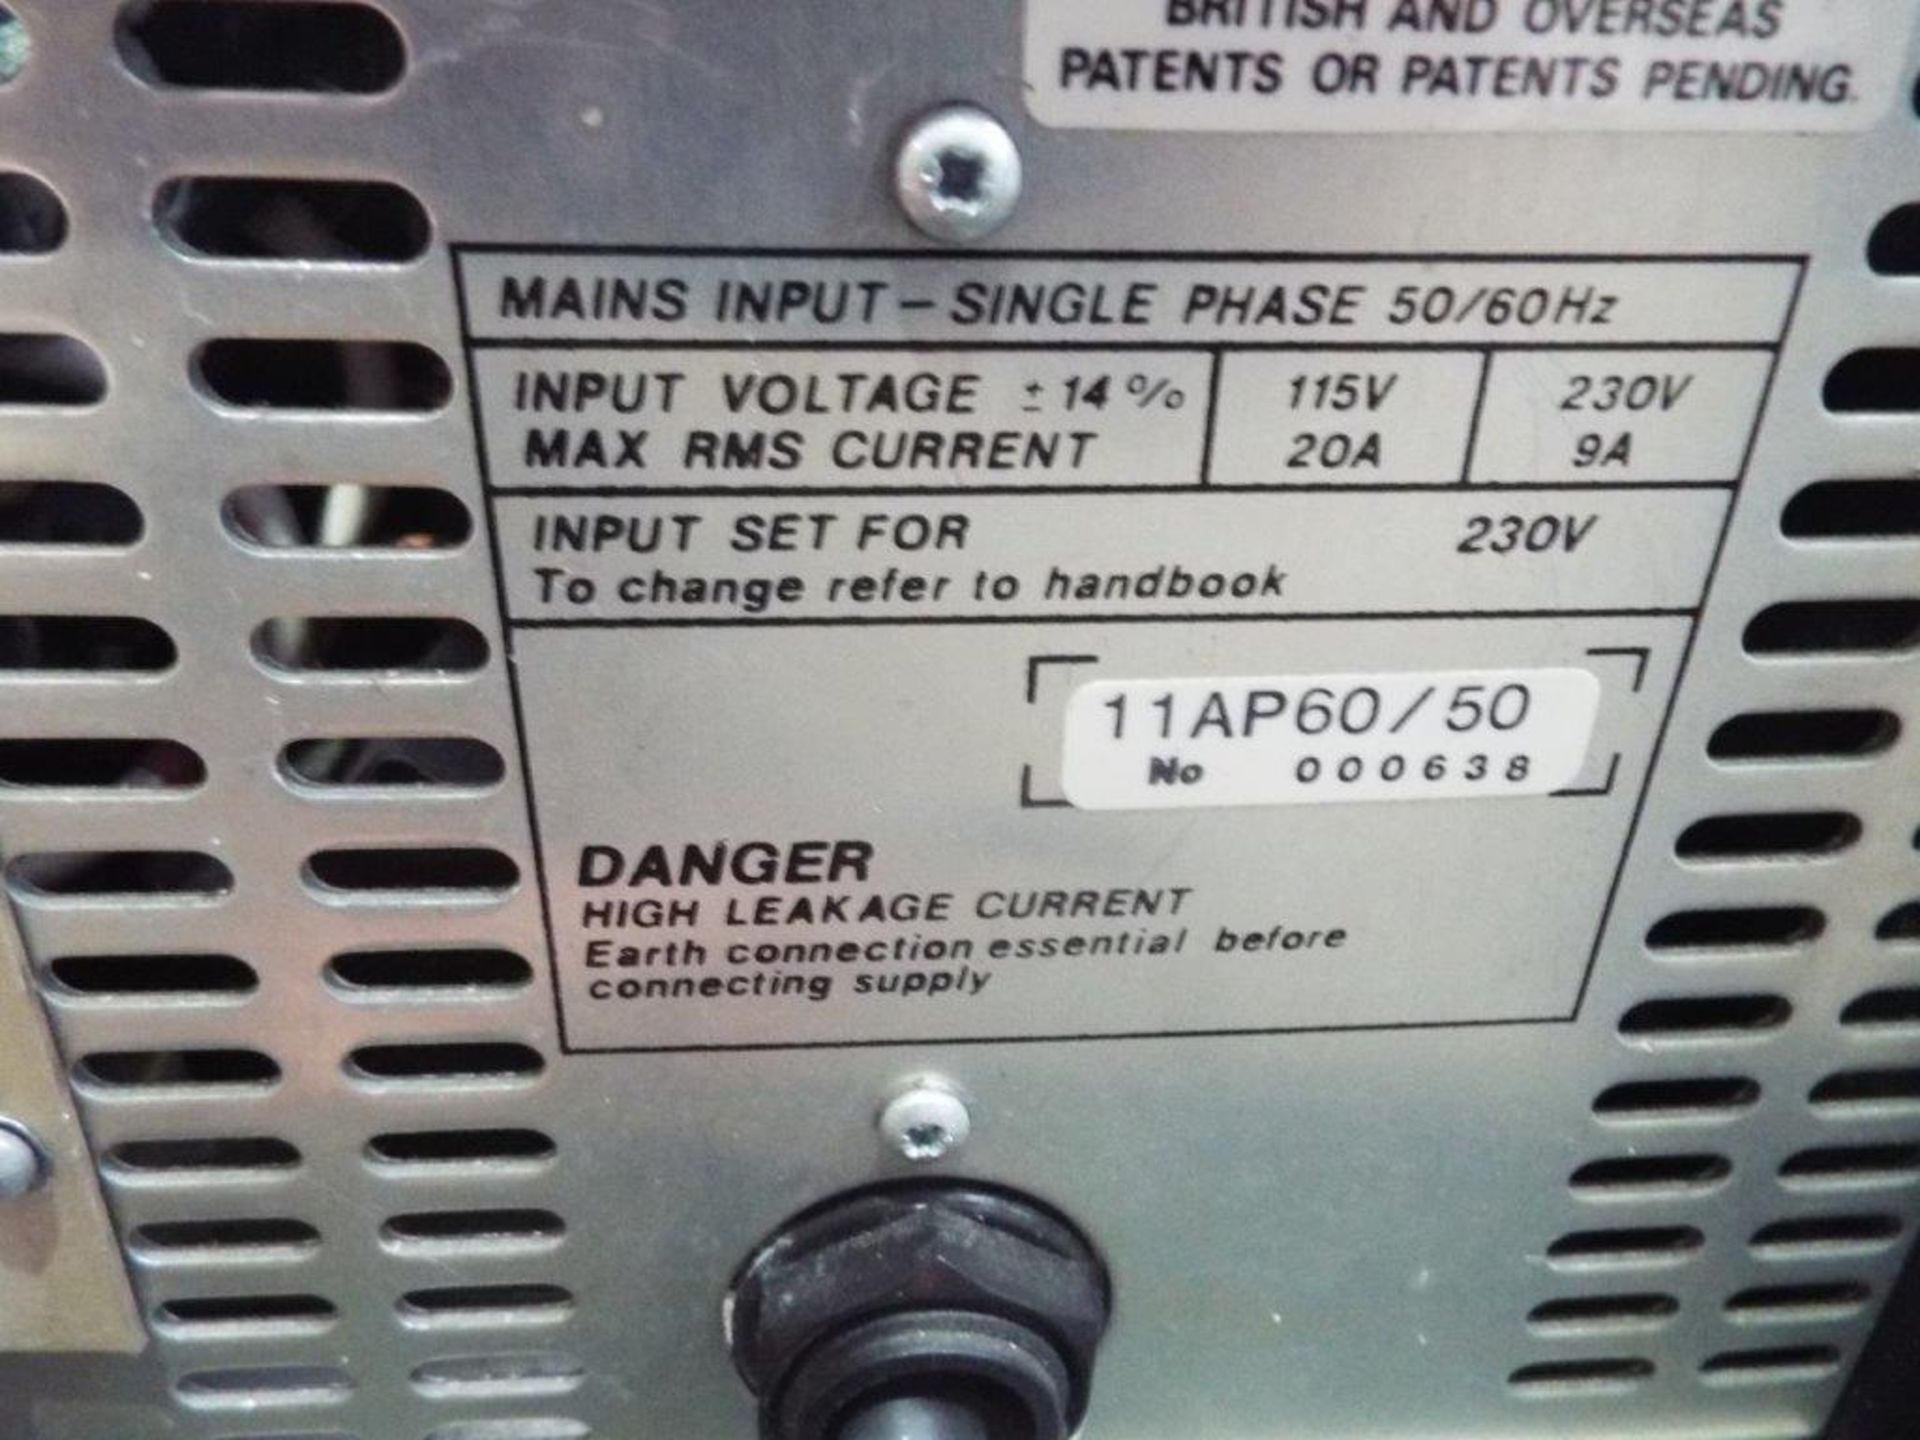 Farnell AP60/50 Regulated Power Supply with Transit Case - Image 7 of 10